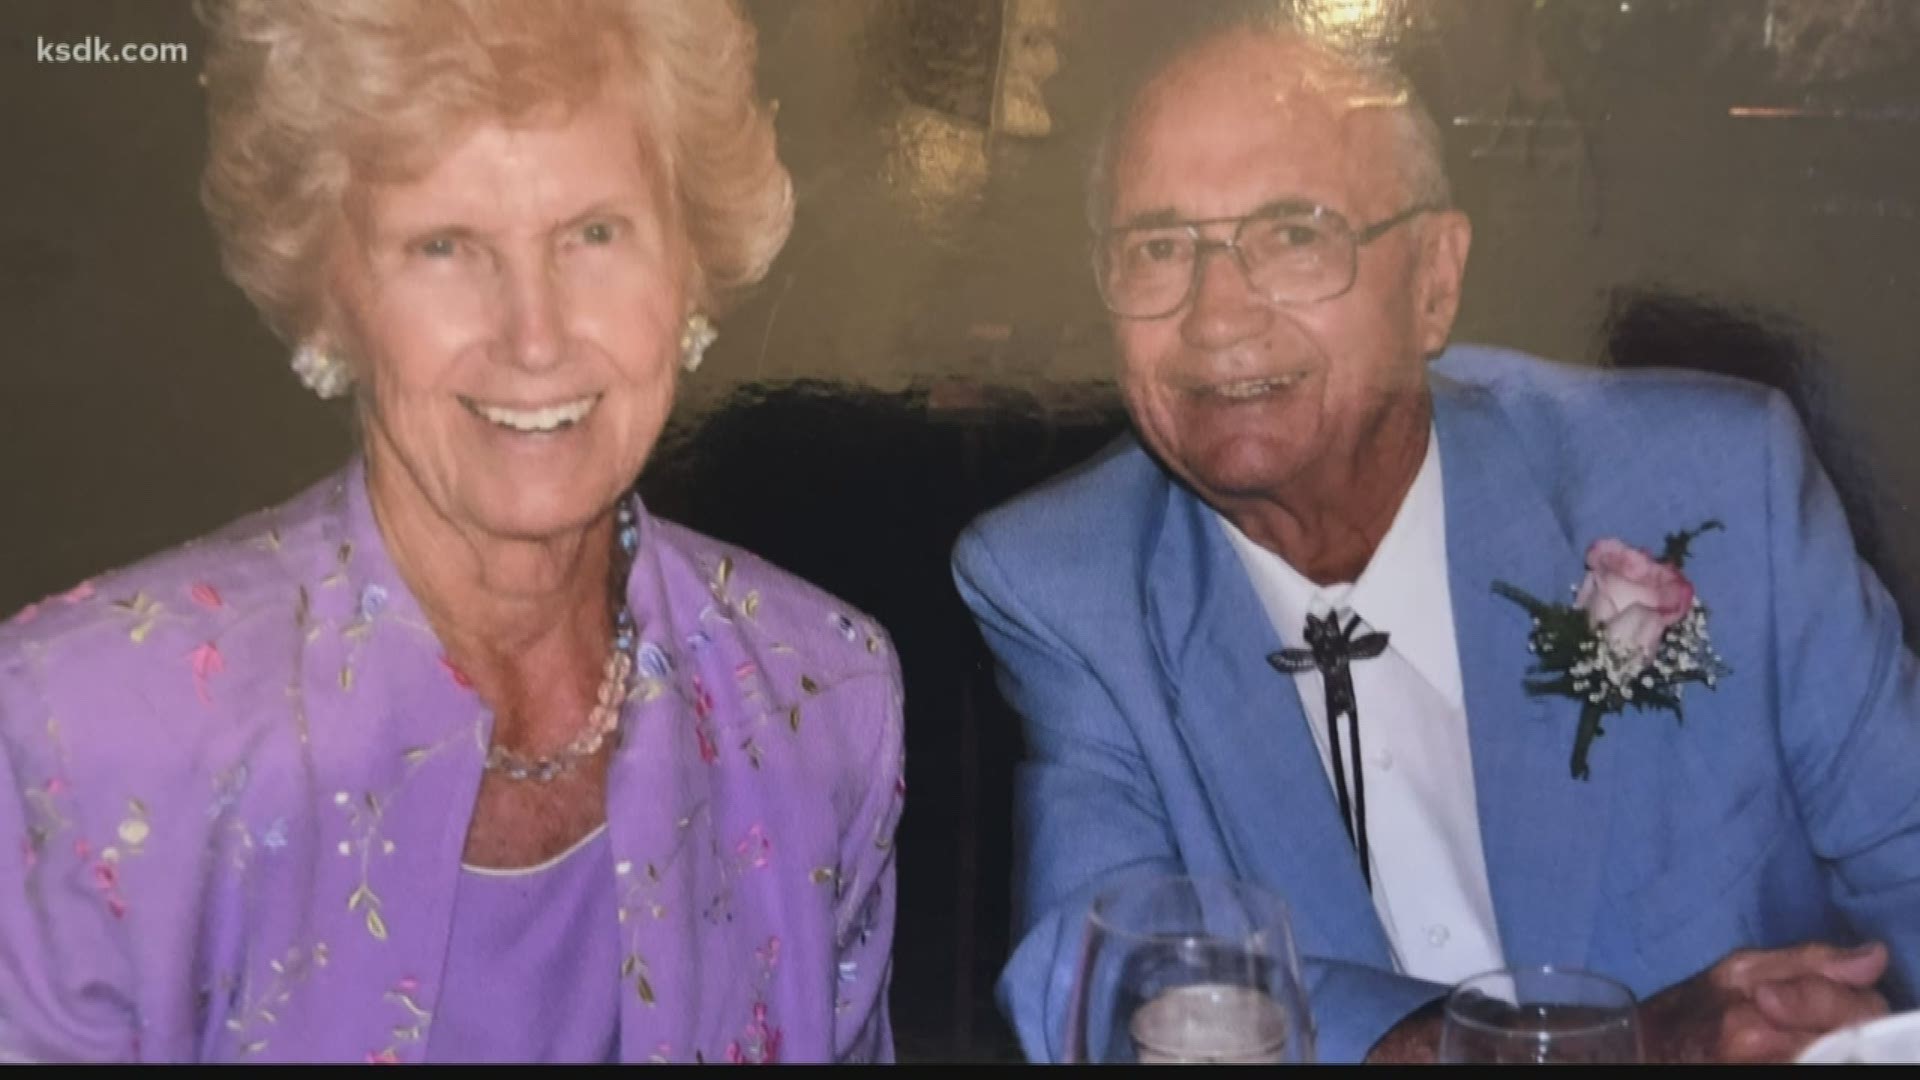 Bernard Steffel, 91, and Marilyn Steffel, 89, celebrated their wedding anniversary on Thursday and were returning home after a weekend trip to the Ozarks.